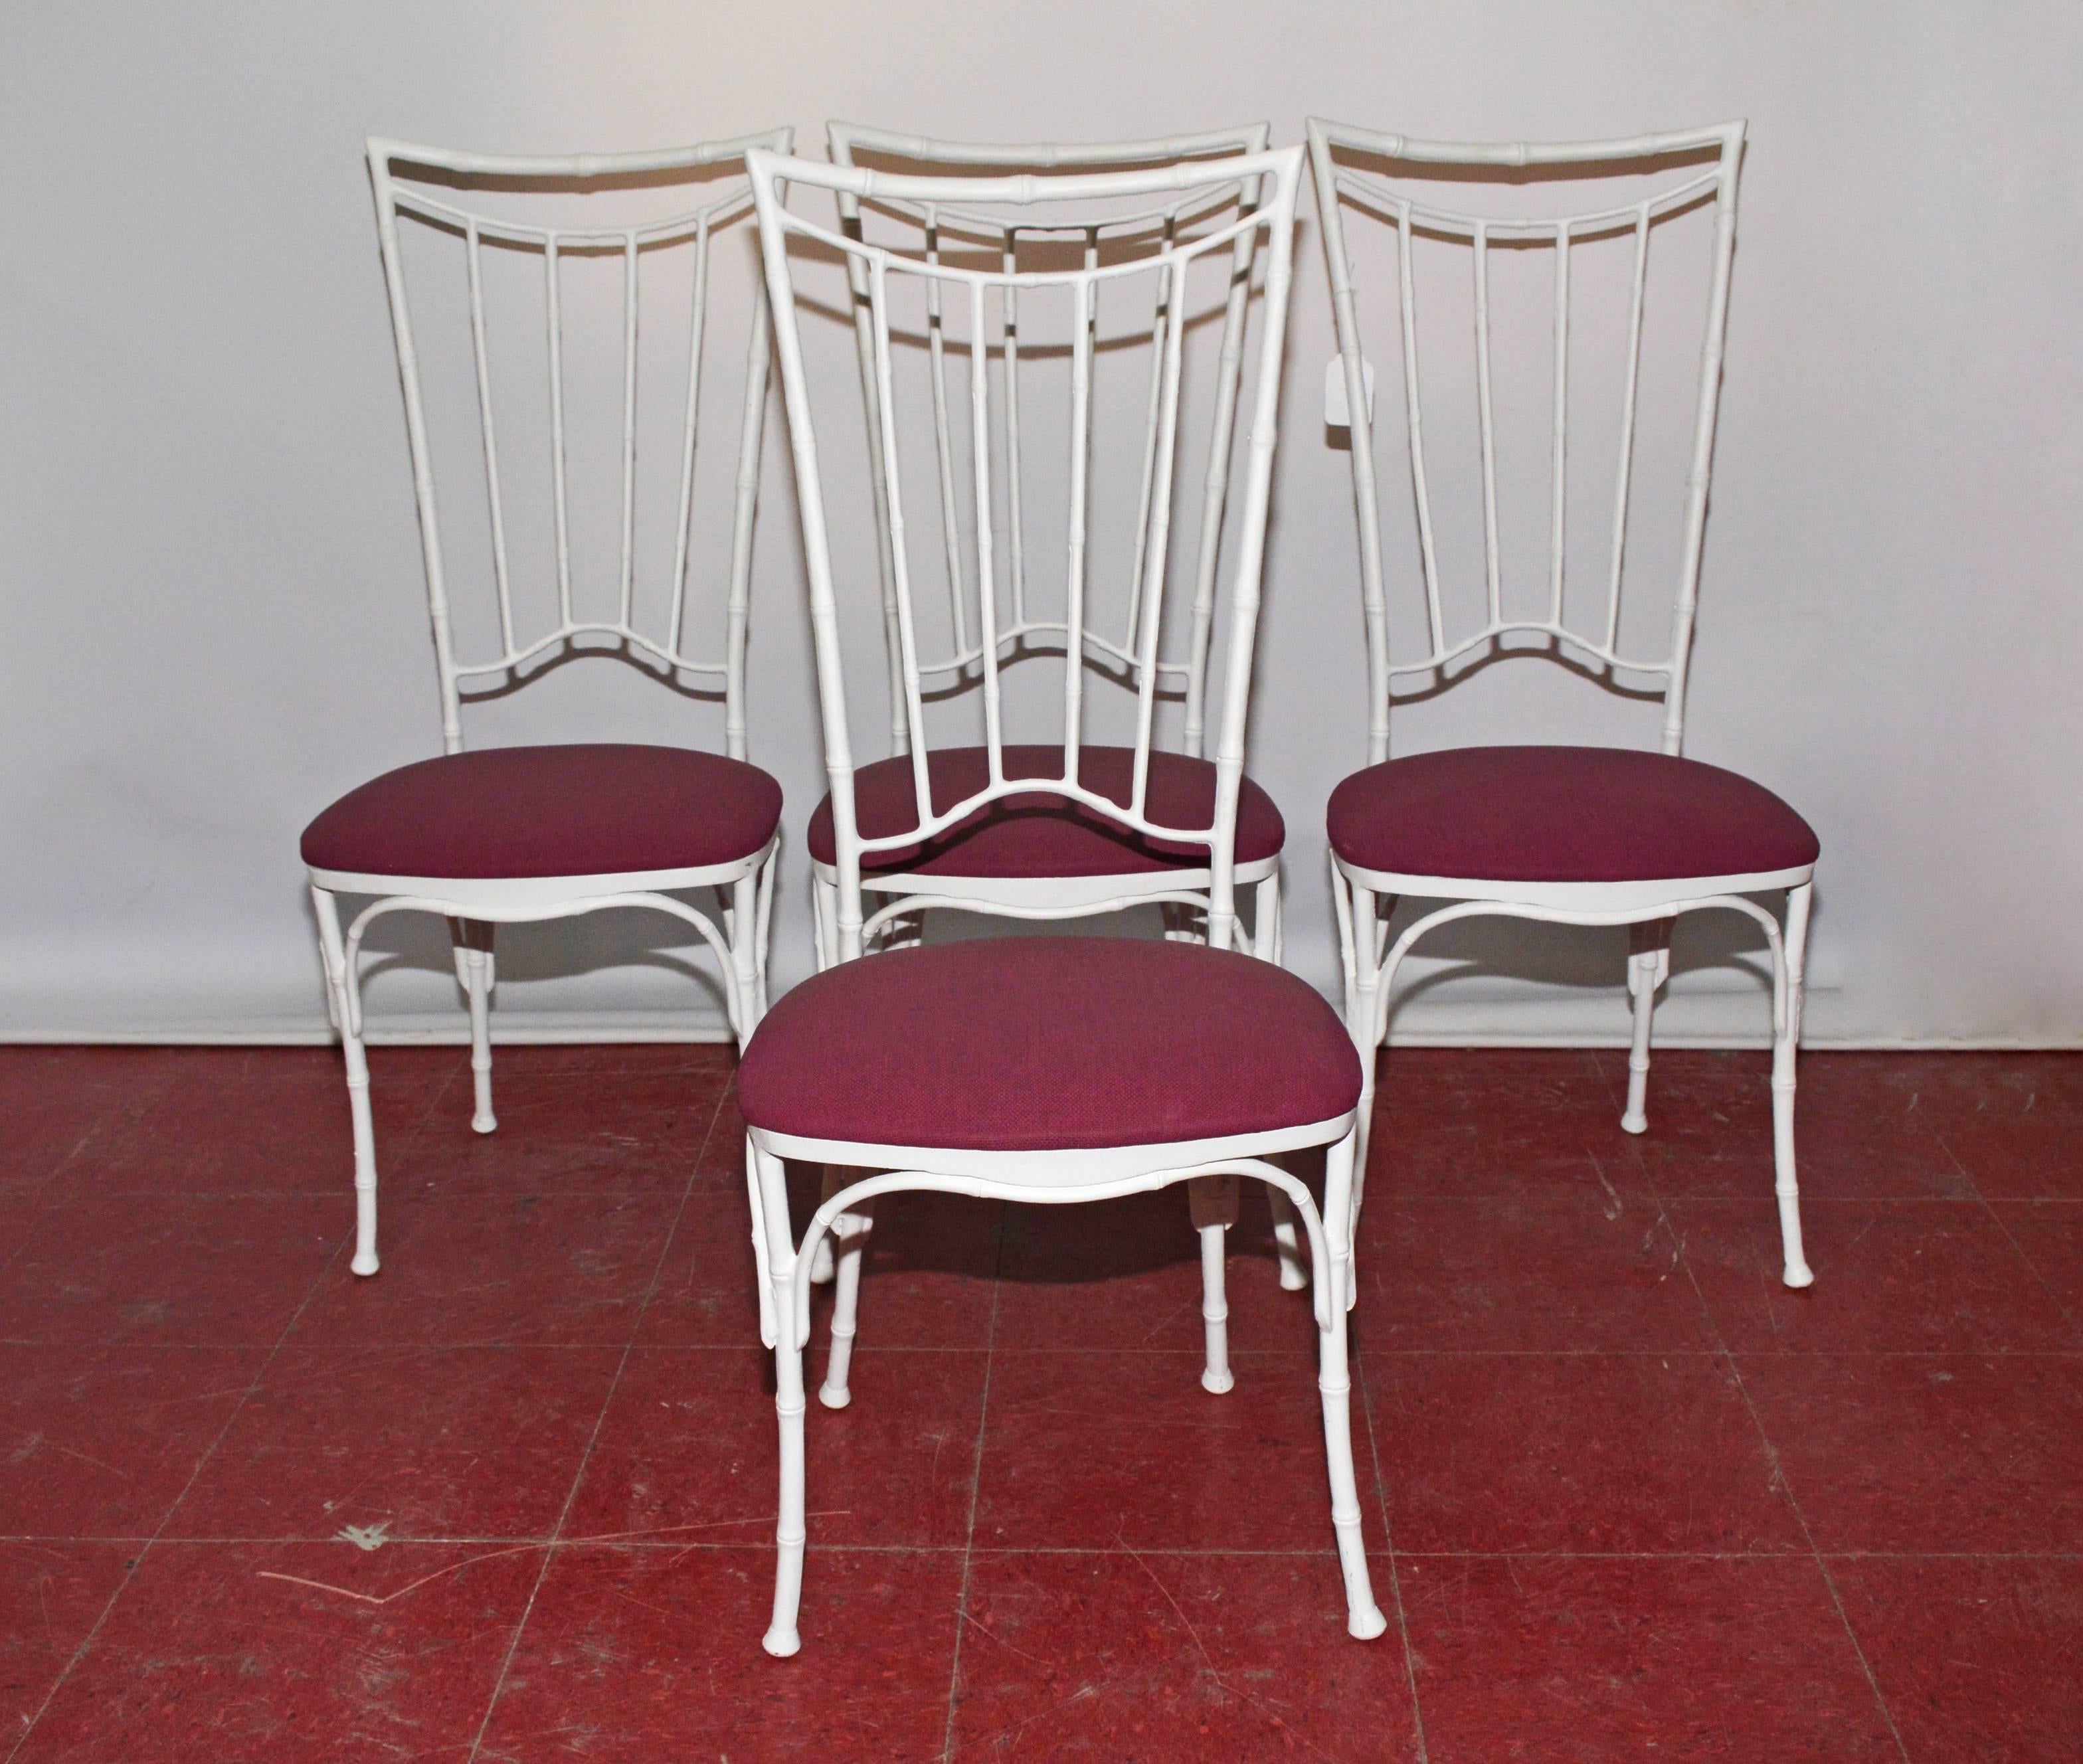 wrought iron chairs for sale